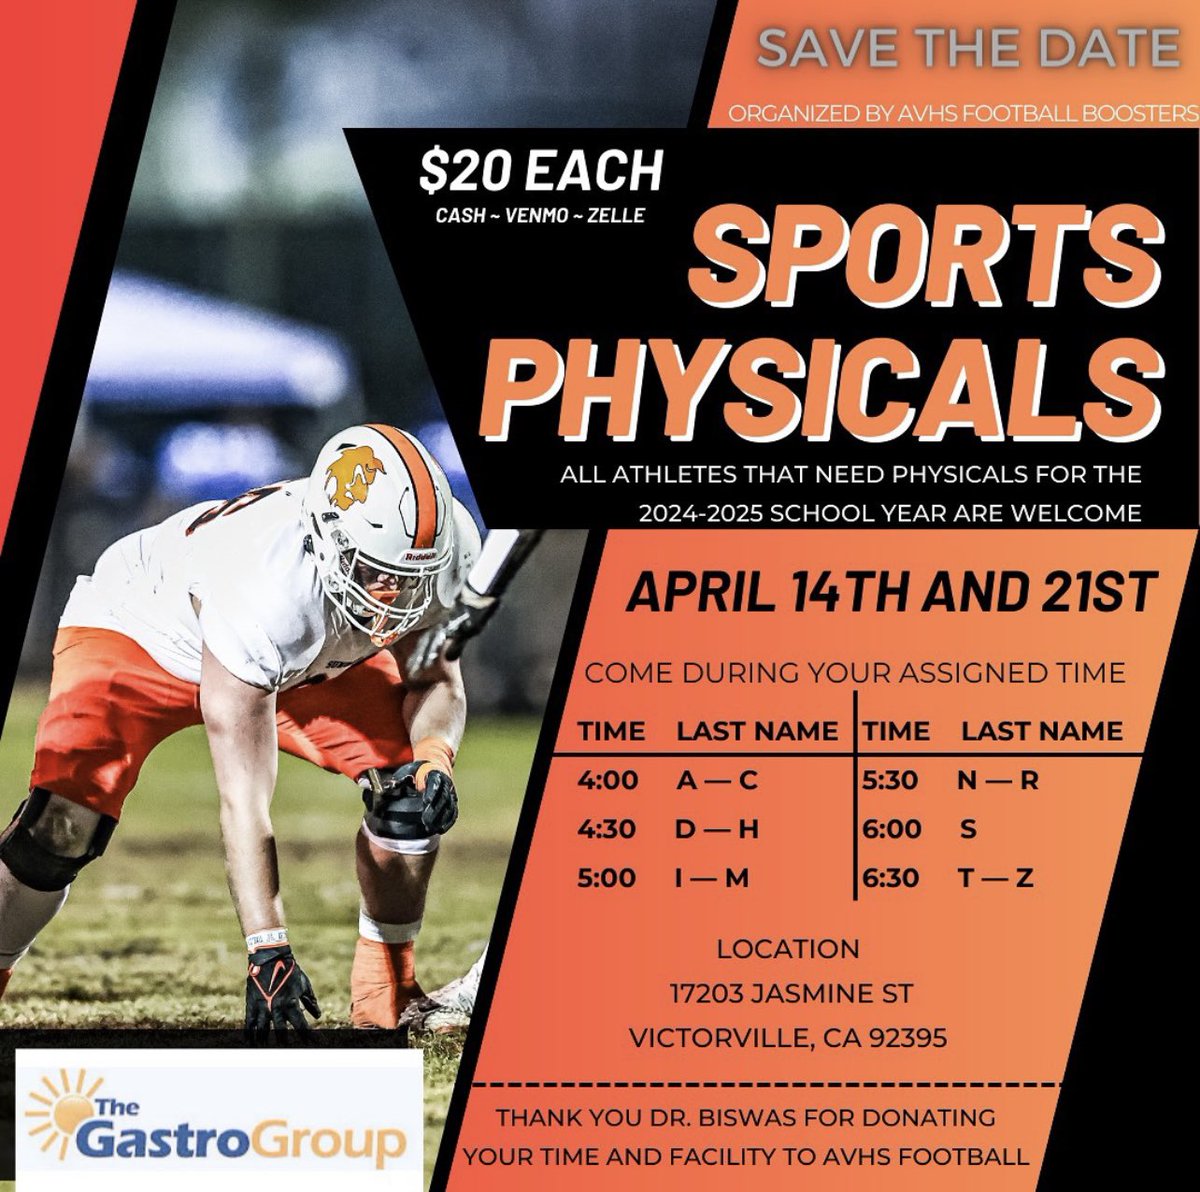 Sports Physicals are open to ANY athlete who needs sports physicals for 2024-2025 season. APR 14th & 21st at THE GASTRO GROUP 17203 Jasmine Street, VV! Come during your assigned time. $20 Cash/Venmo/Zelle. Thanks to Dr. Biswas & The Gastro Group for donating his time & facility!